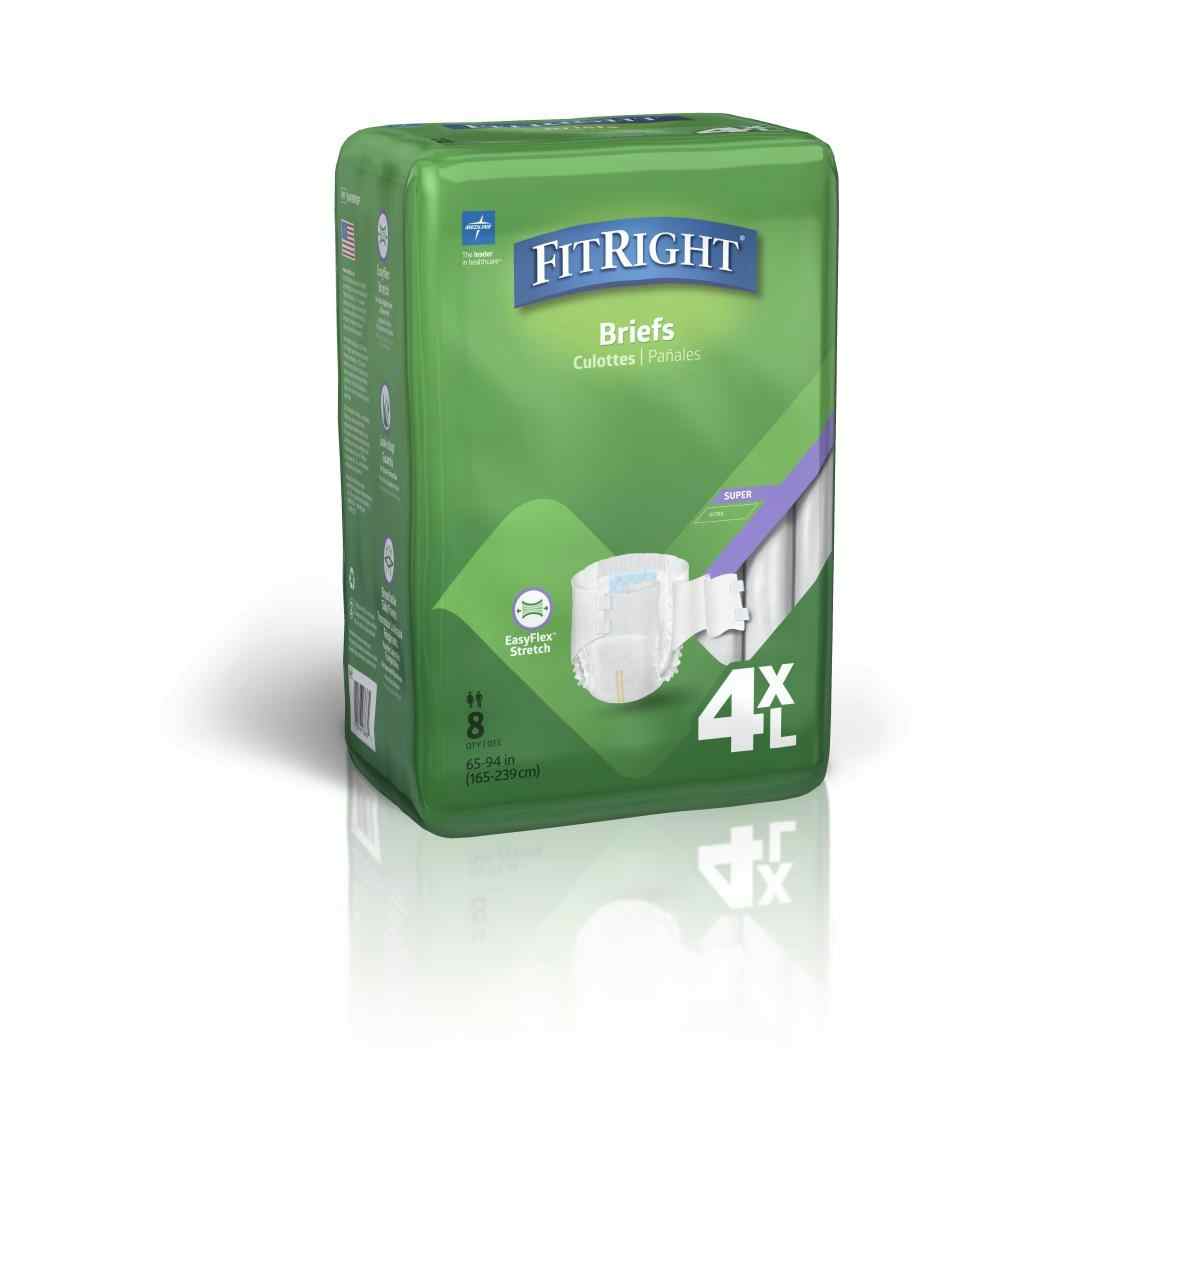 FitRight Baribrief Incontinence Briefs Adult Diapers with Tabs, Overnight Absorbency, BARIBRIEFC, White - 65-94" - Case of 32